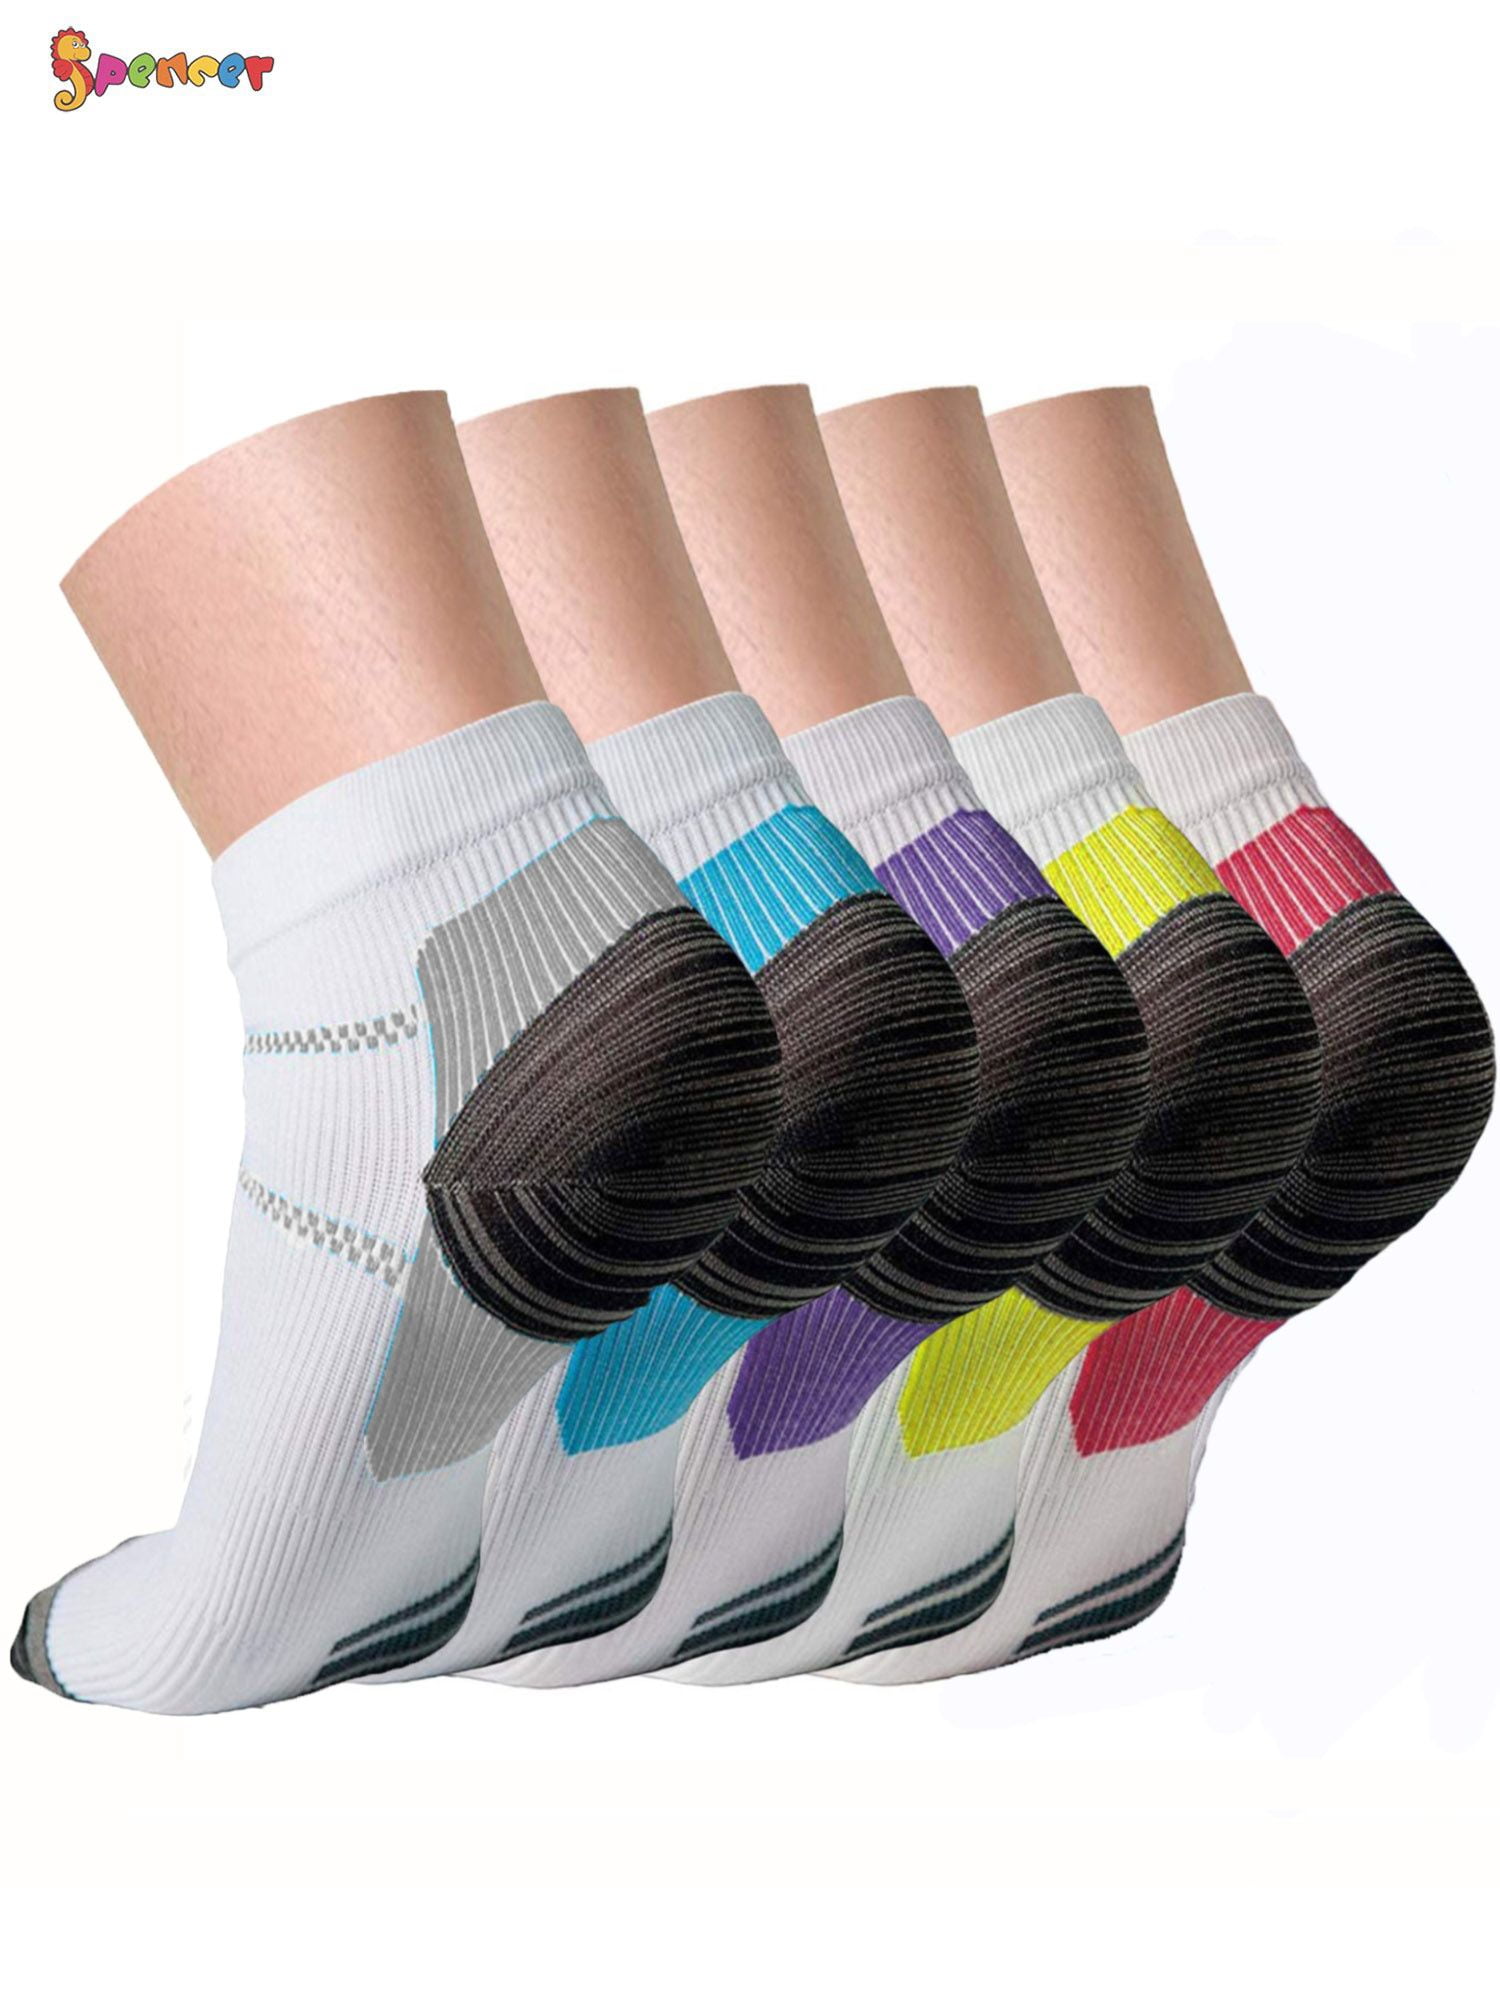 Compression Ankle Cushioned Running Sport Socks for Men Women Busy Socks Low Cut Arch Support Tab Athletic Socks 3 Pairs